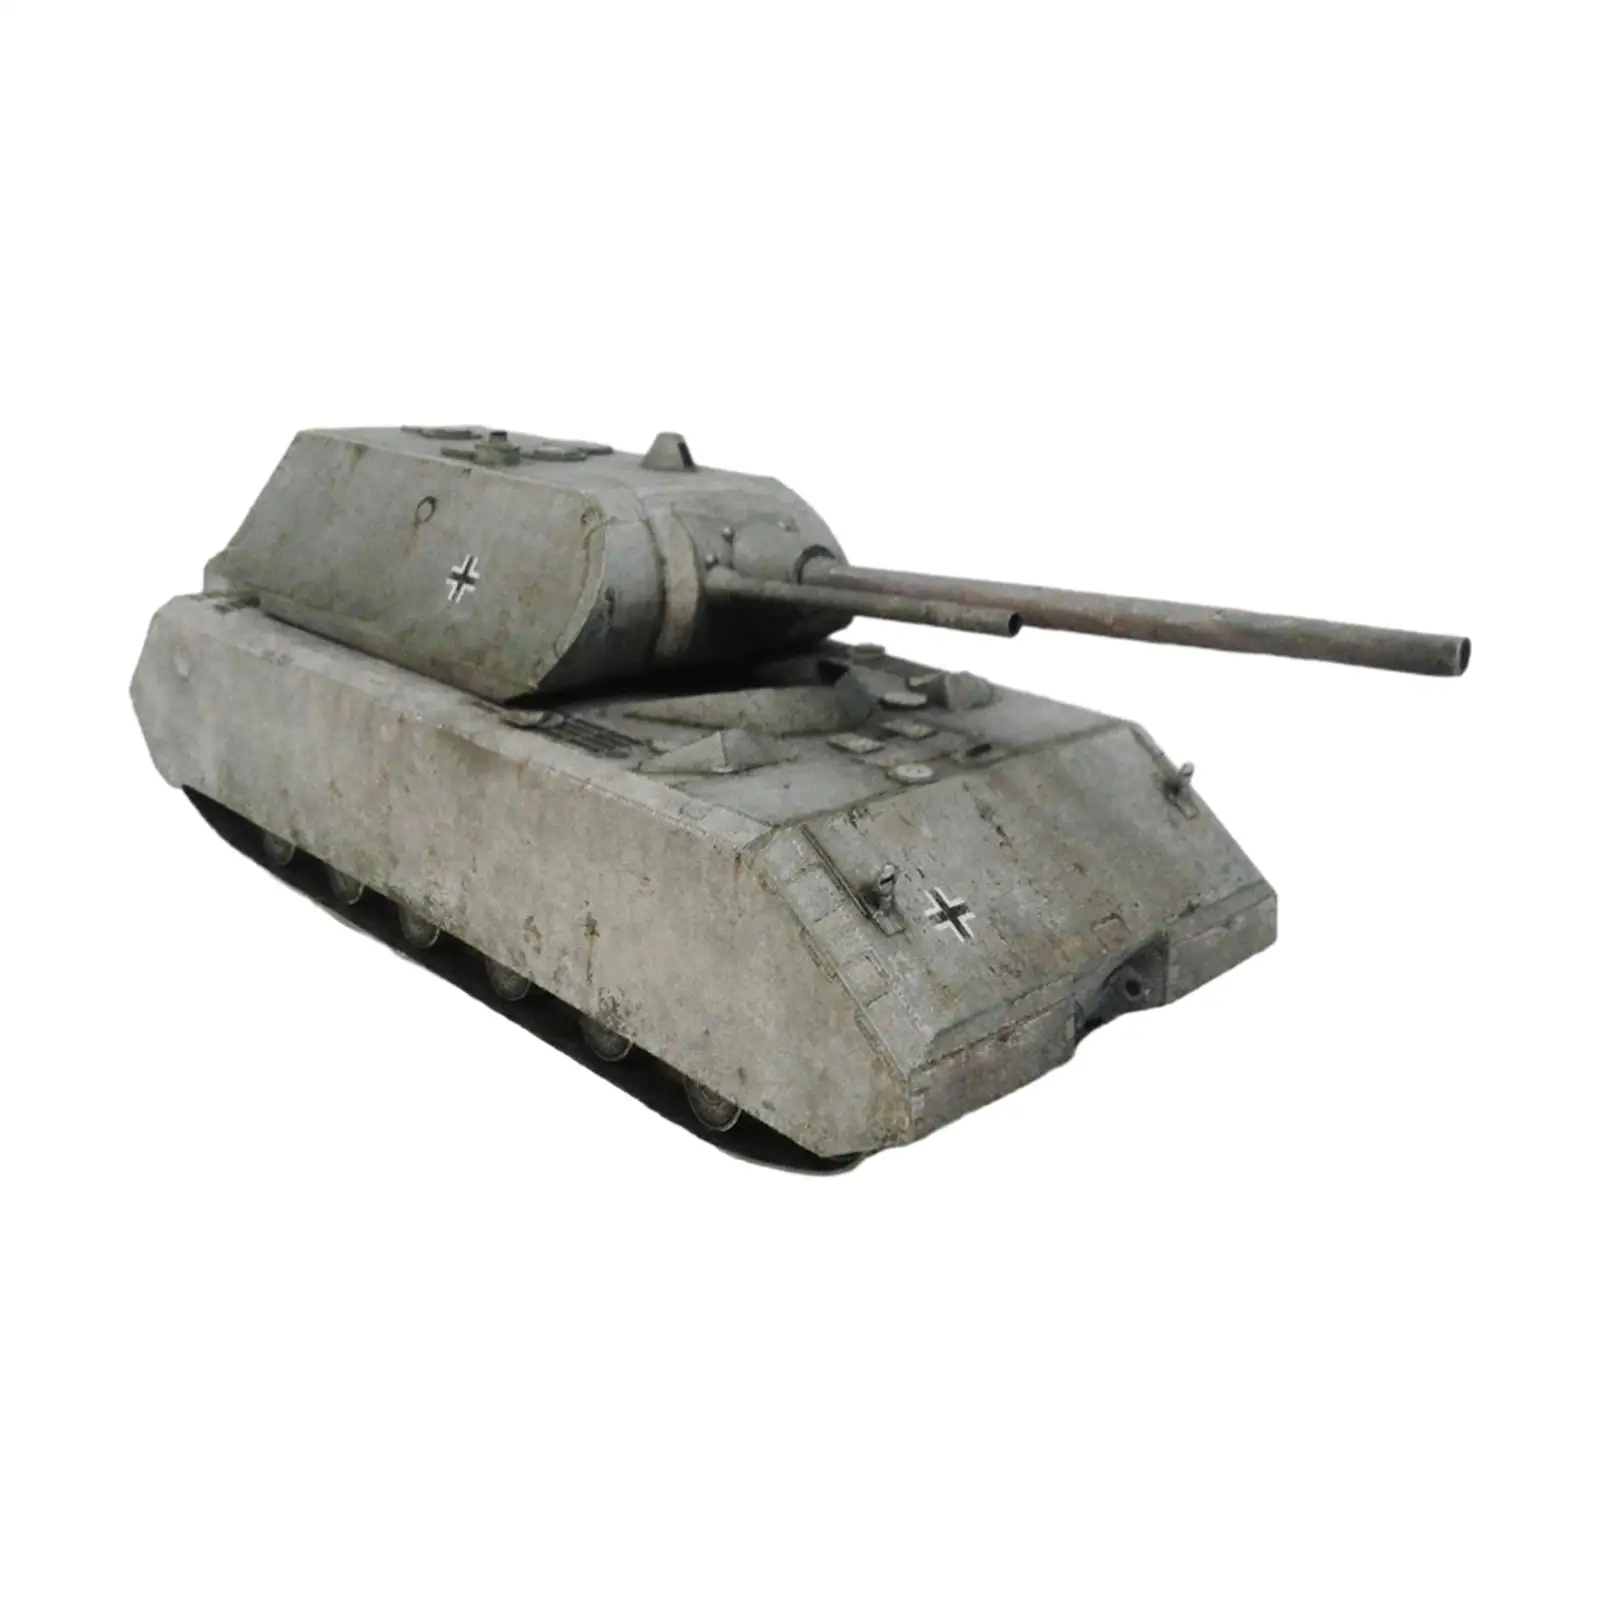 Miniature Tank Model Kits: Educational DIY Craft for Kids And Adults